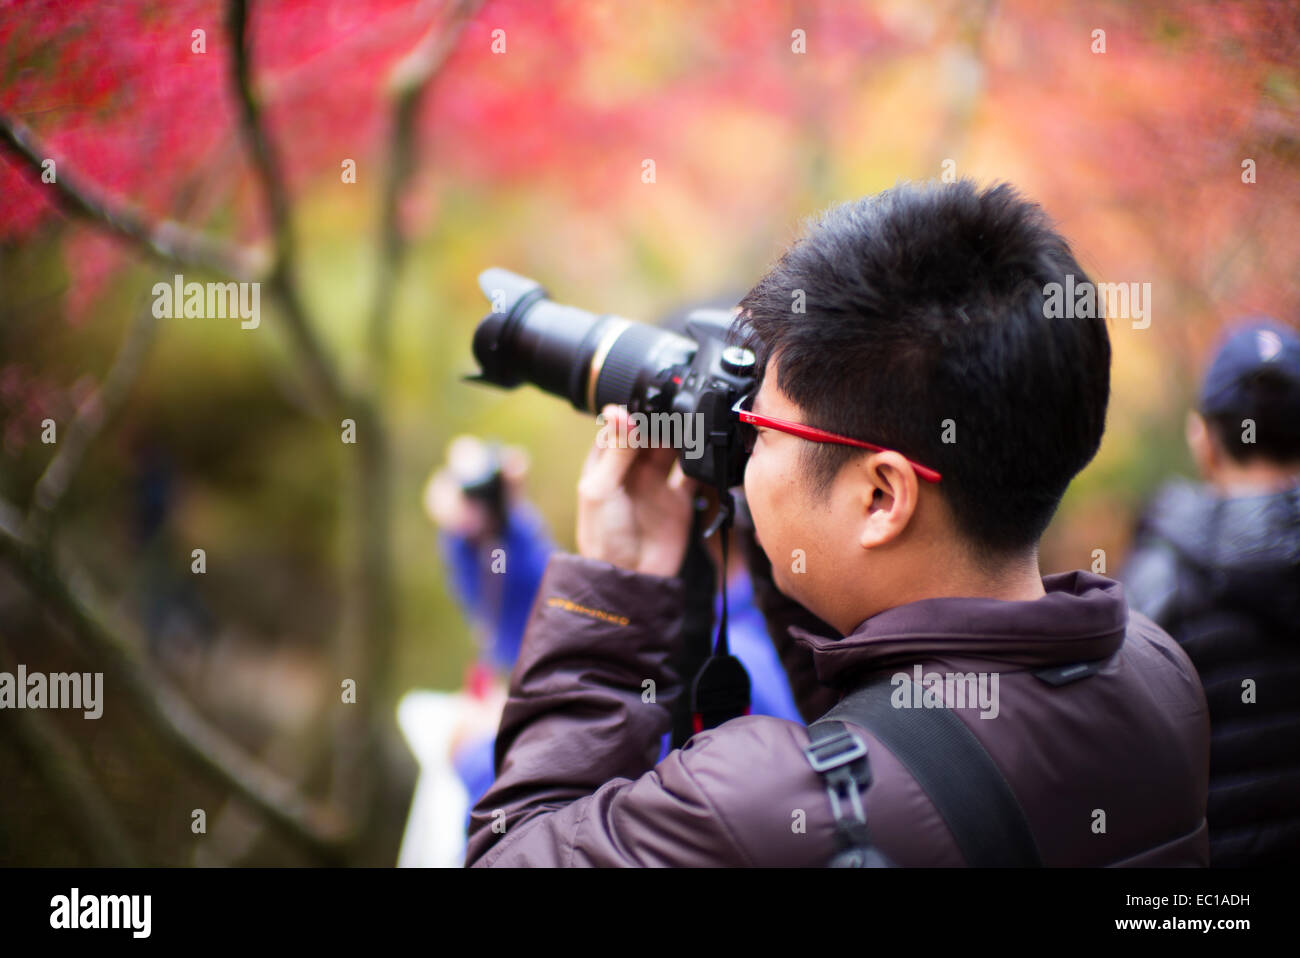 Tourist photographing the autumn leaves in Kyoto, Japan. Stock Photo